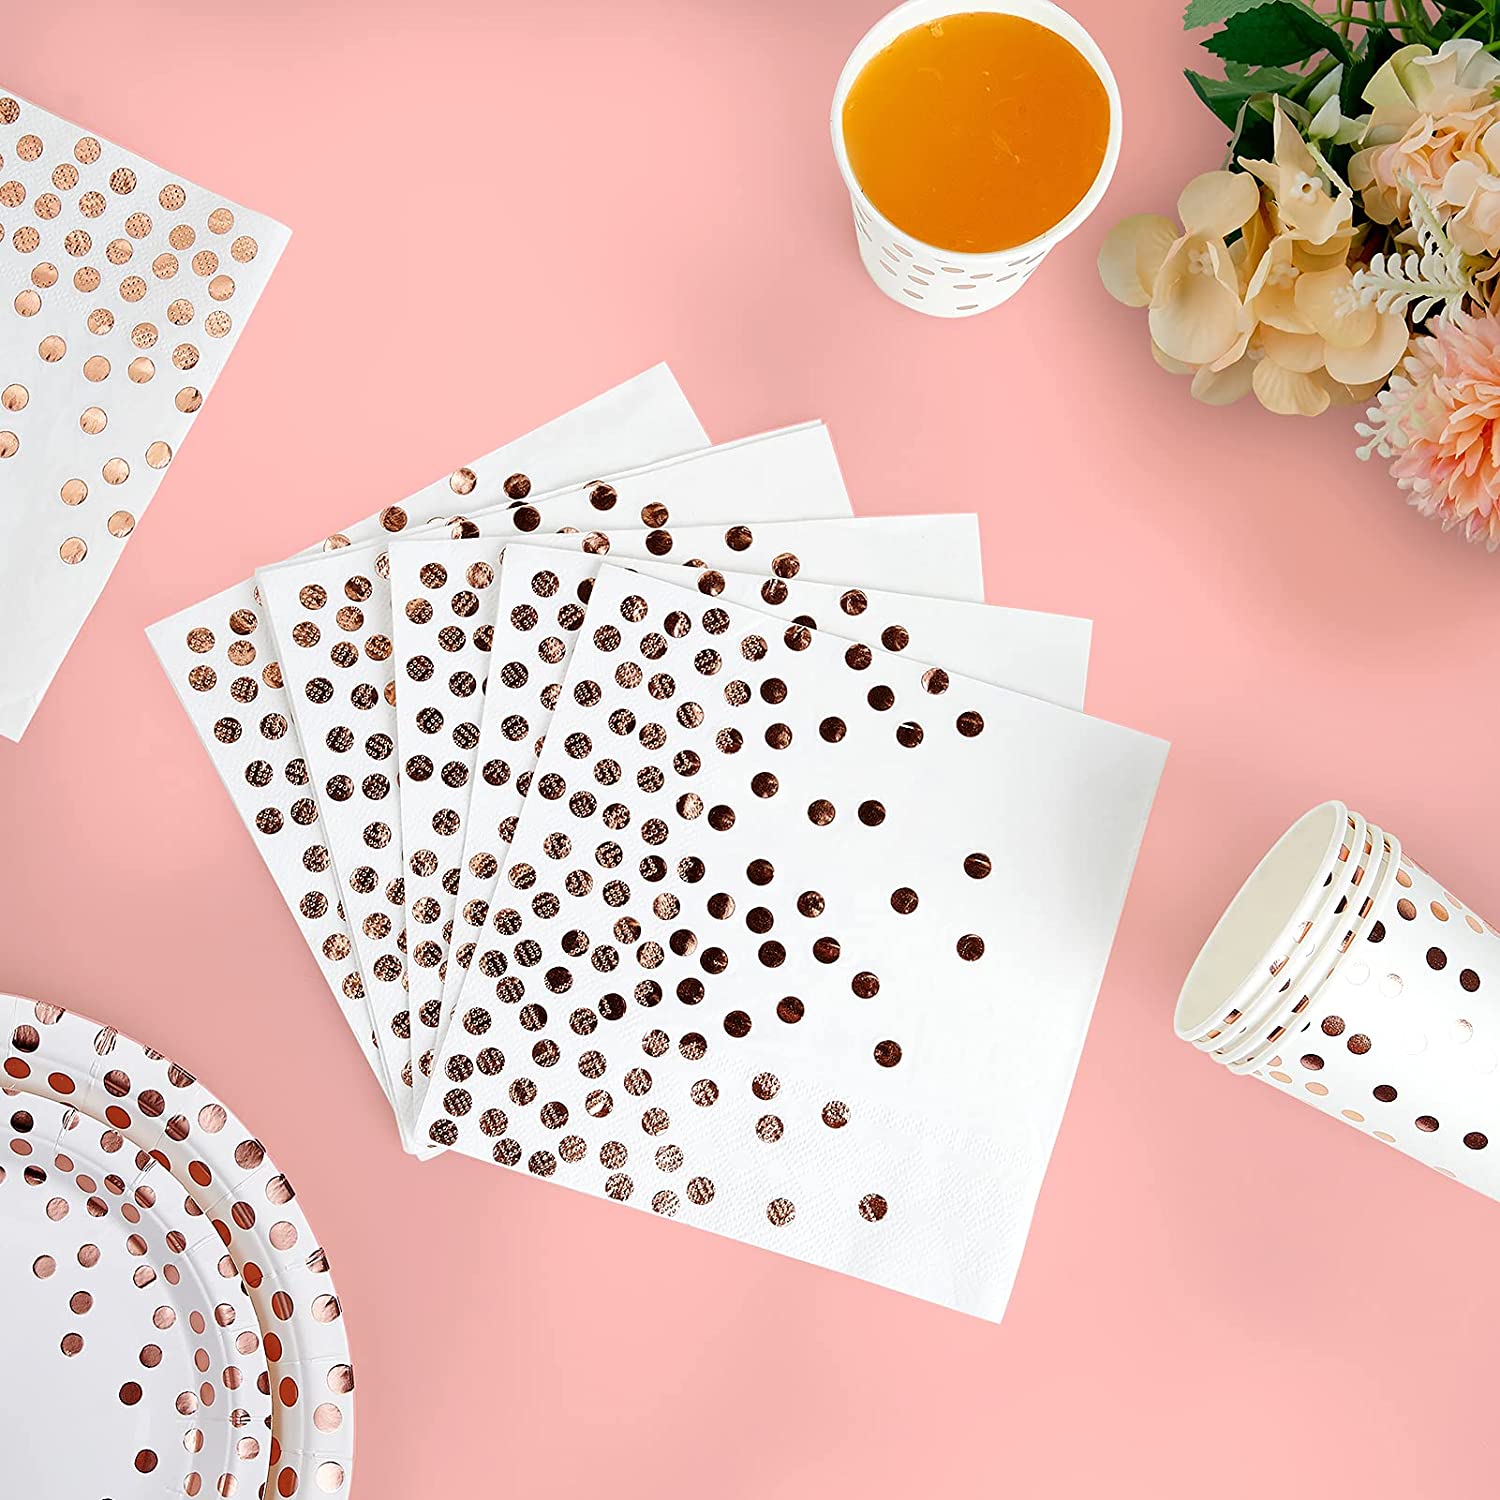 White and Rose Gold Party Supplies - 100 PCS Disposable Dinnerware Set